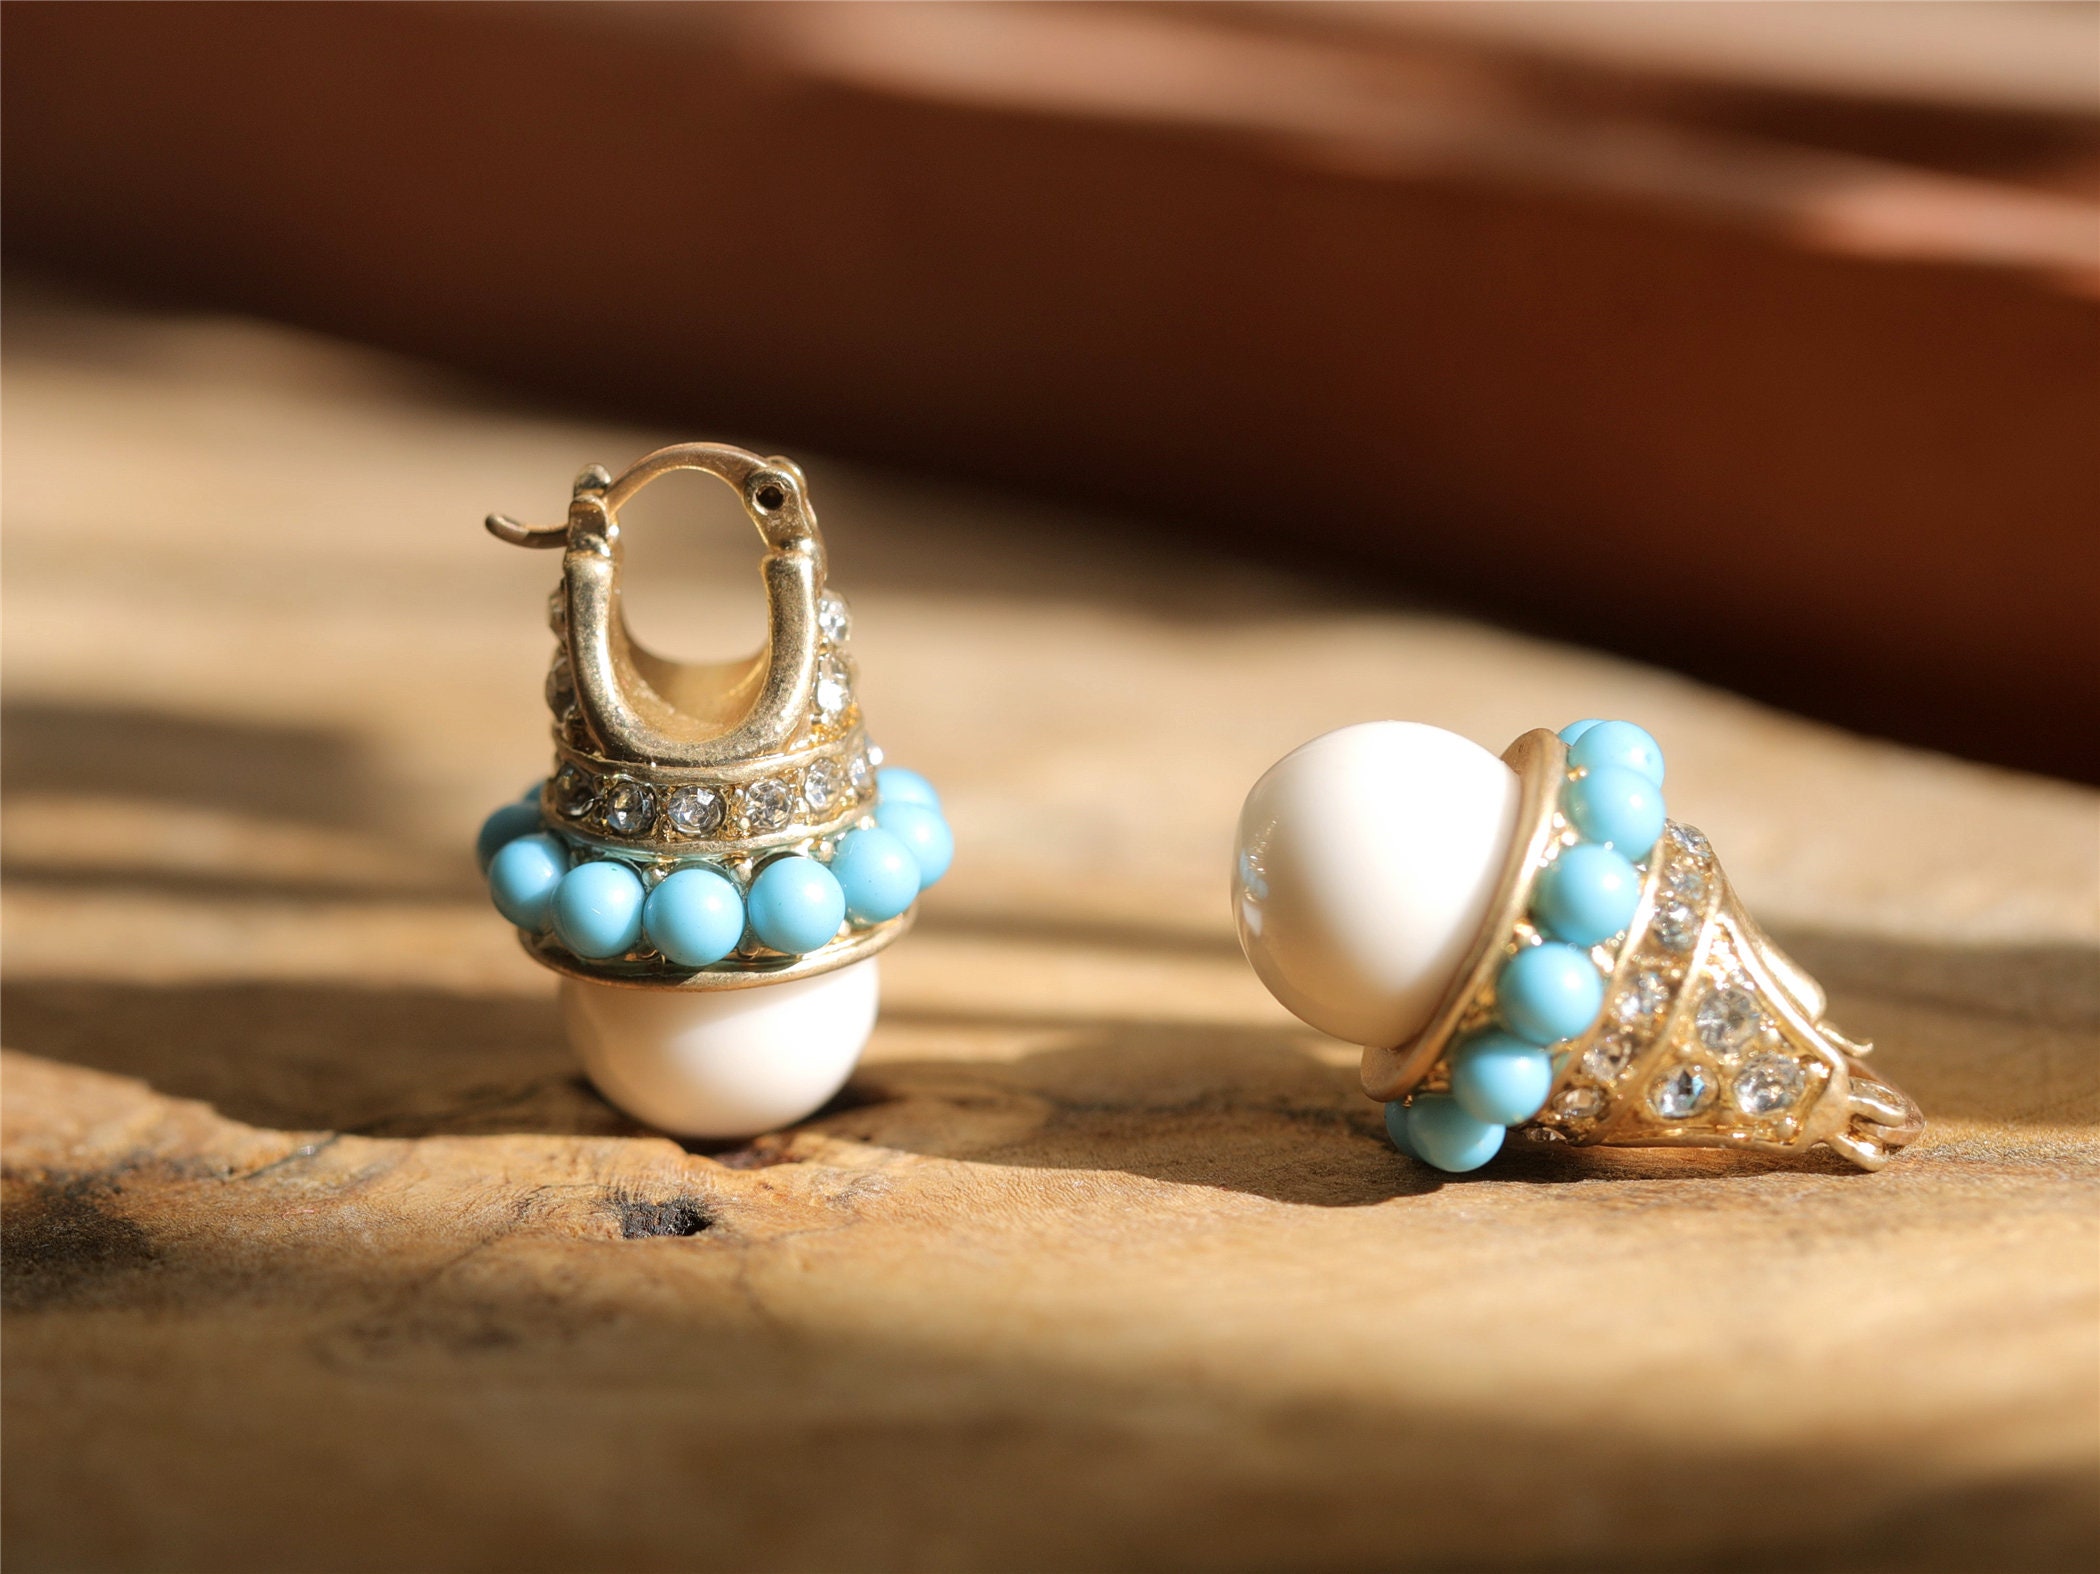 Boucles d'oreilles dormeuses CIRCUS Or - Perles blanches & turquoise